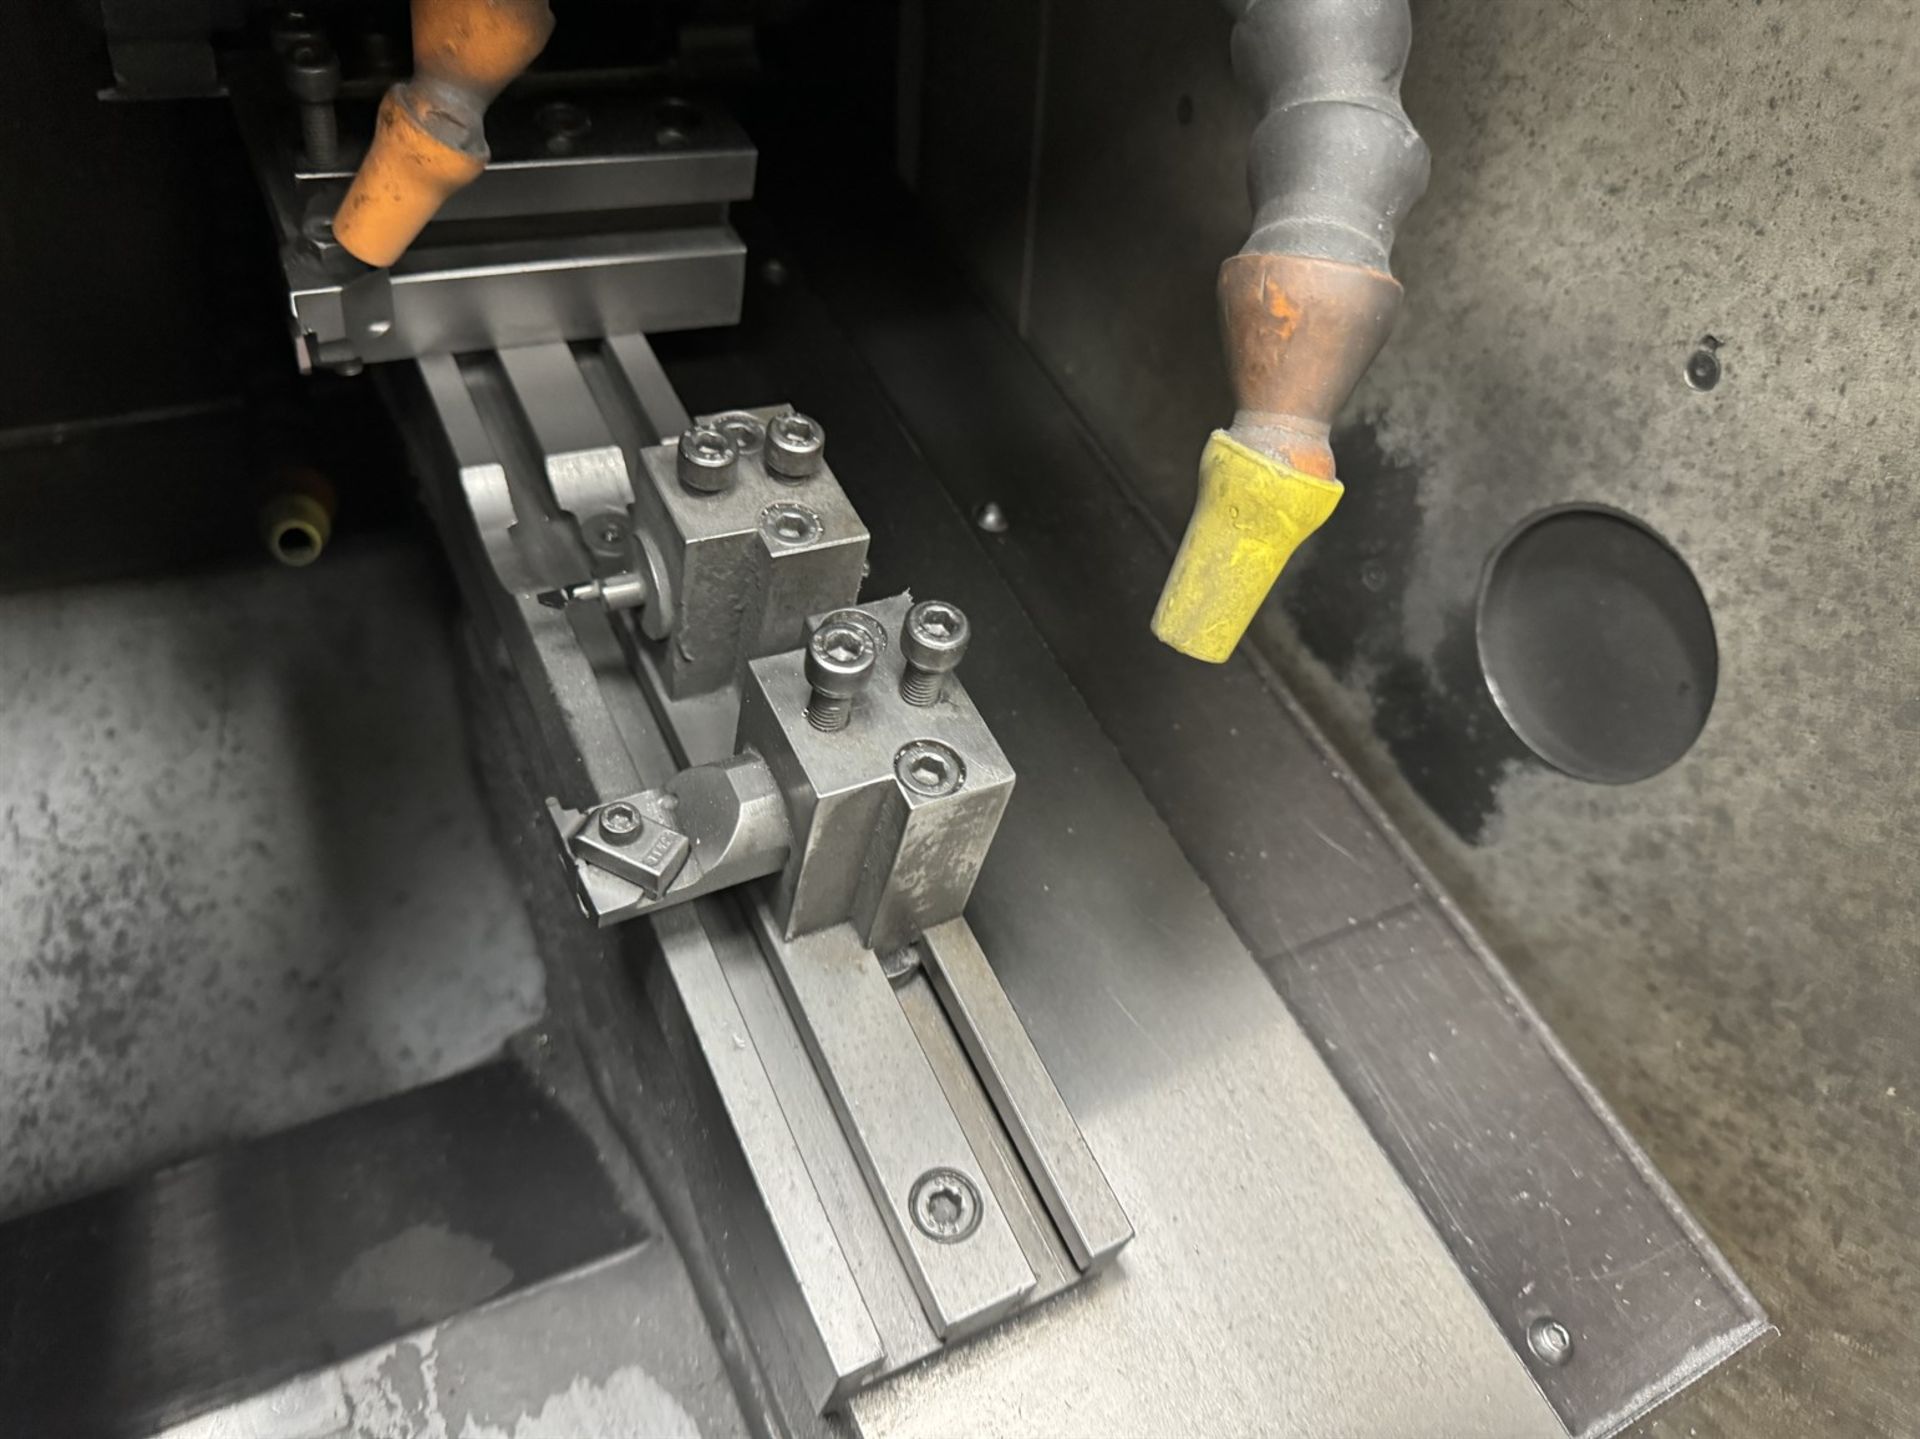 CUBIC GT Z2 CNC Gang Tool Lathe, s/n na, Fanuc Series Oi Mate-TD Control, 60mm Turning Dia, 120mm Sw - Image 5 of 7